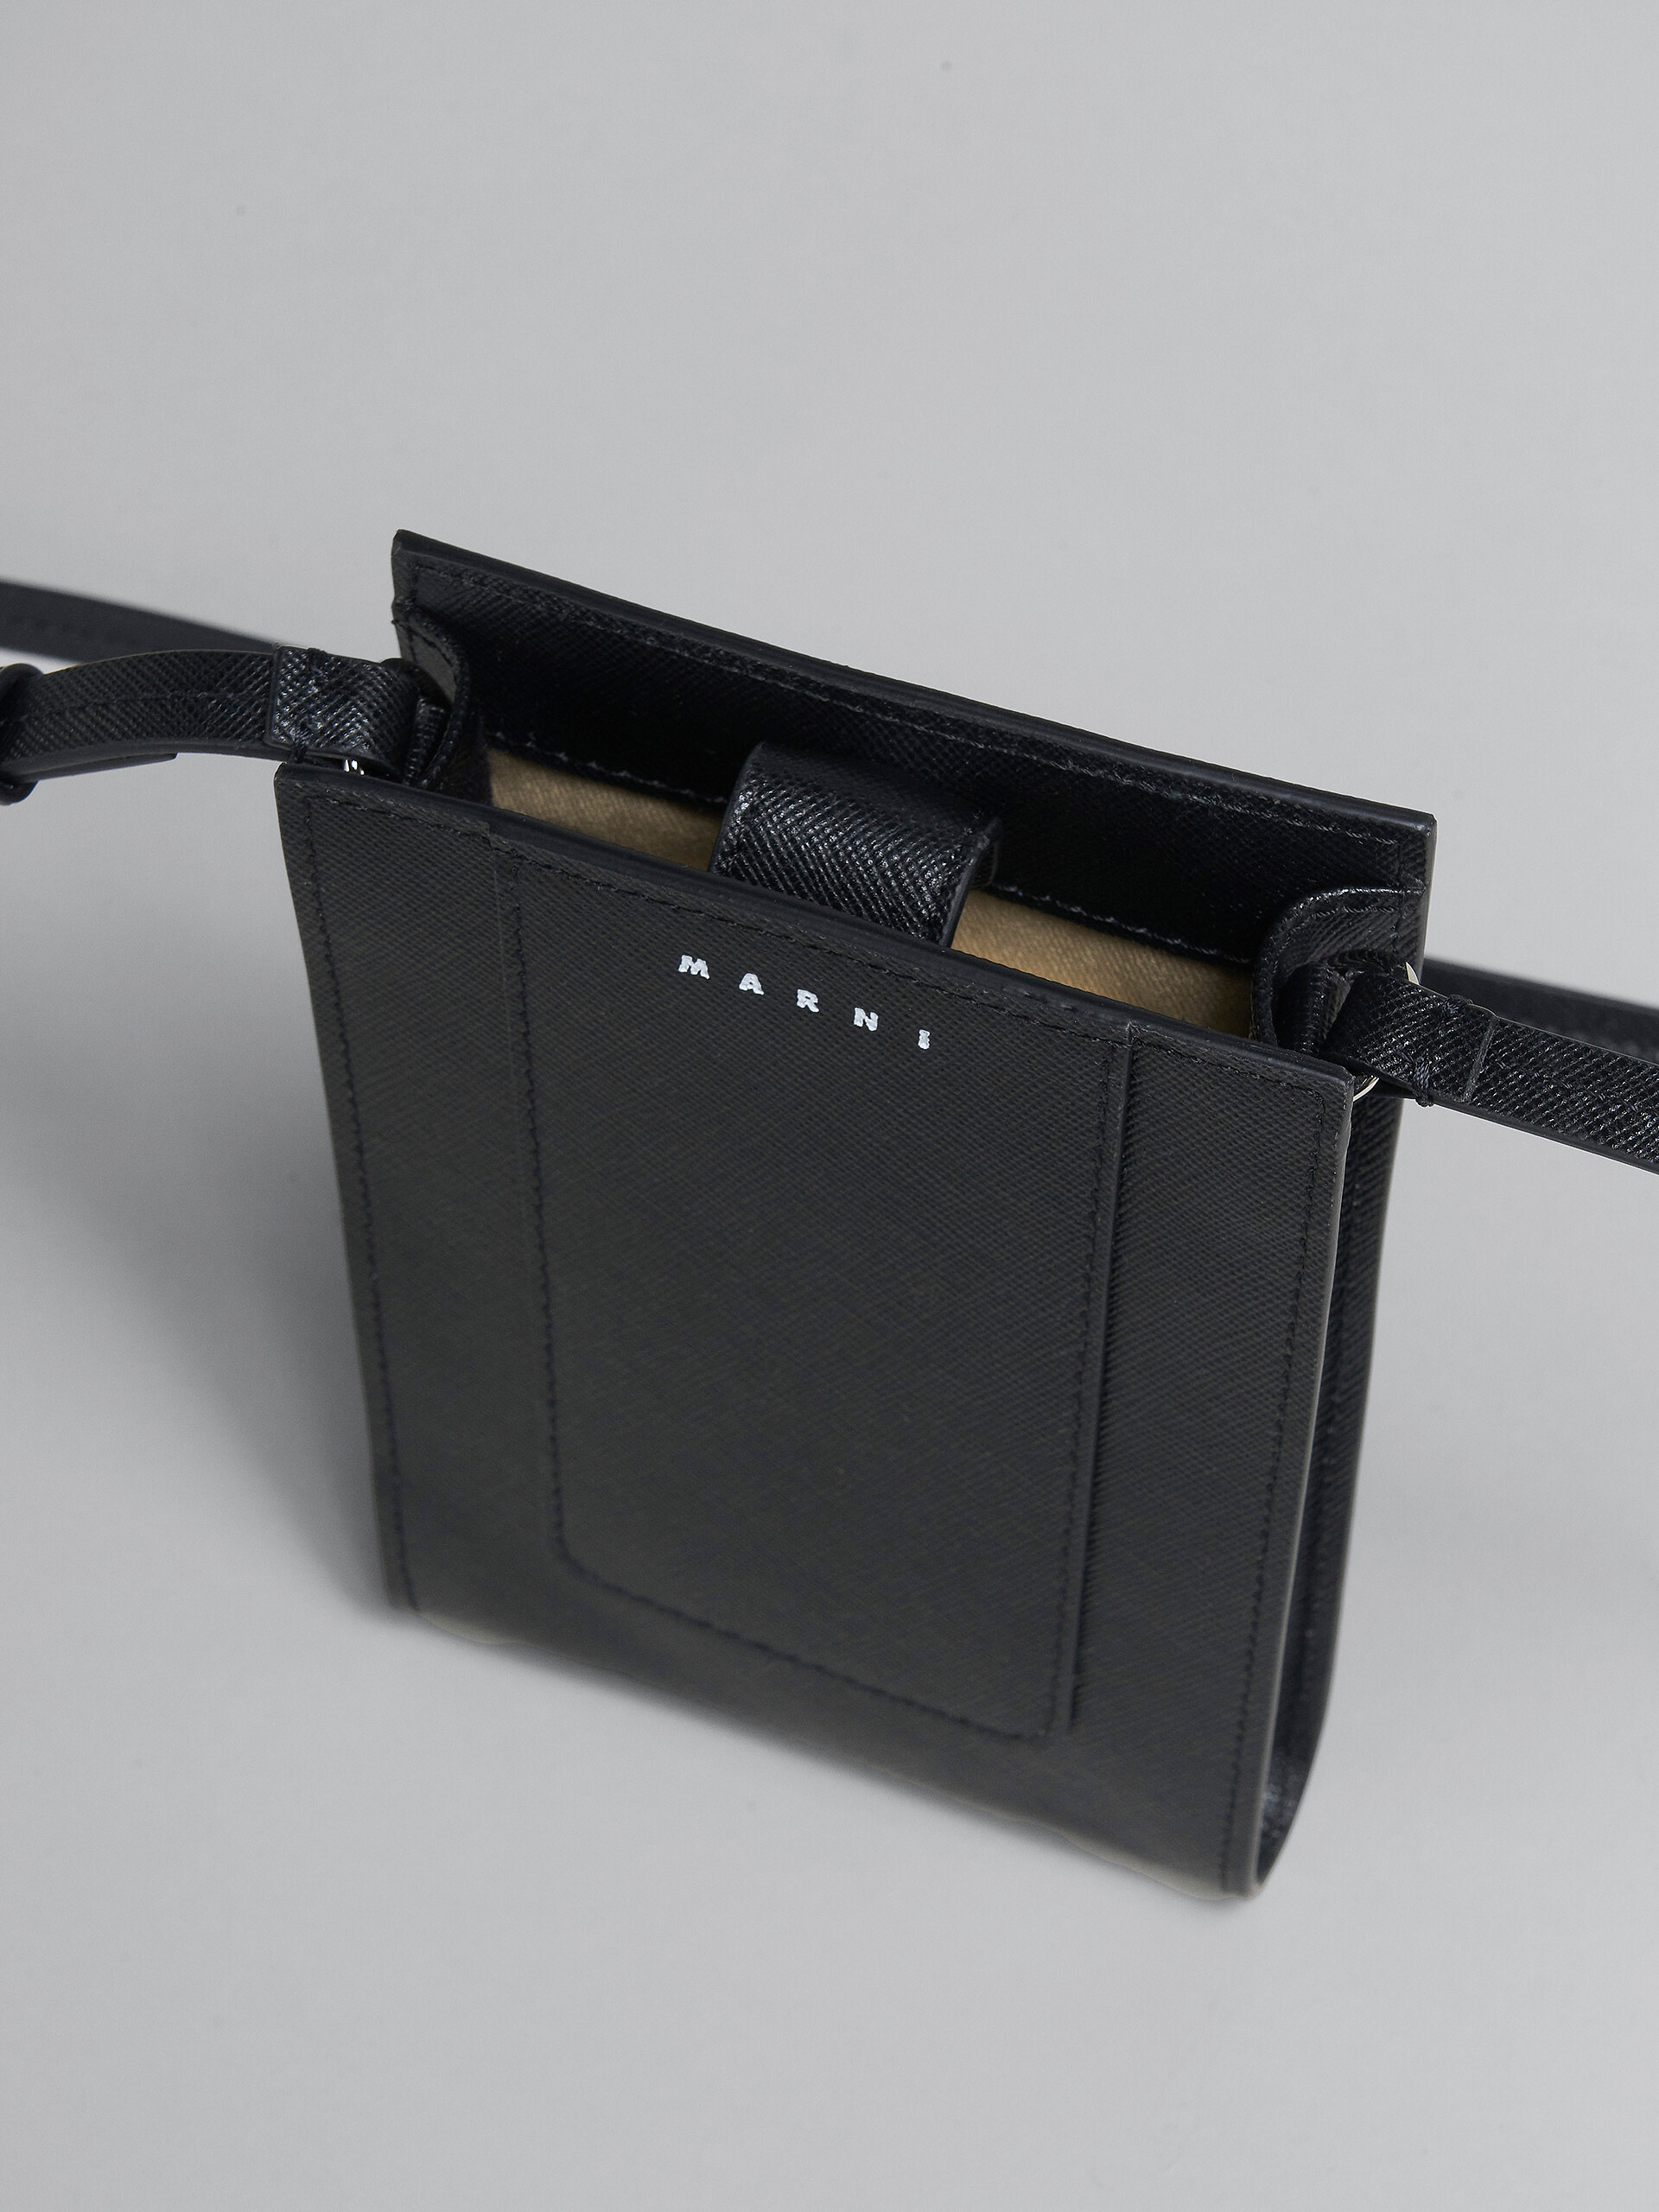 Black saffiano leather phone case - Wallets and Small Leather Goods - Image 4